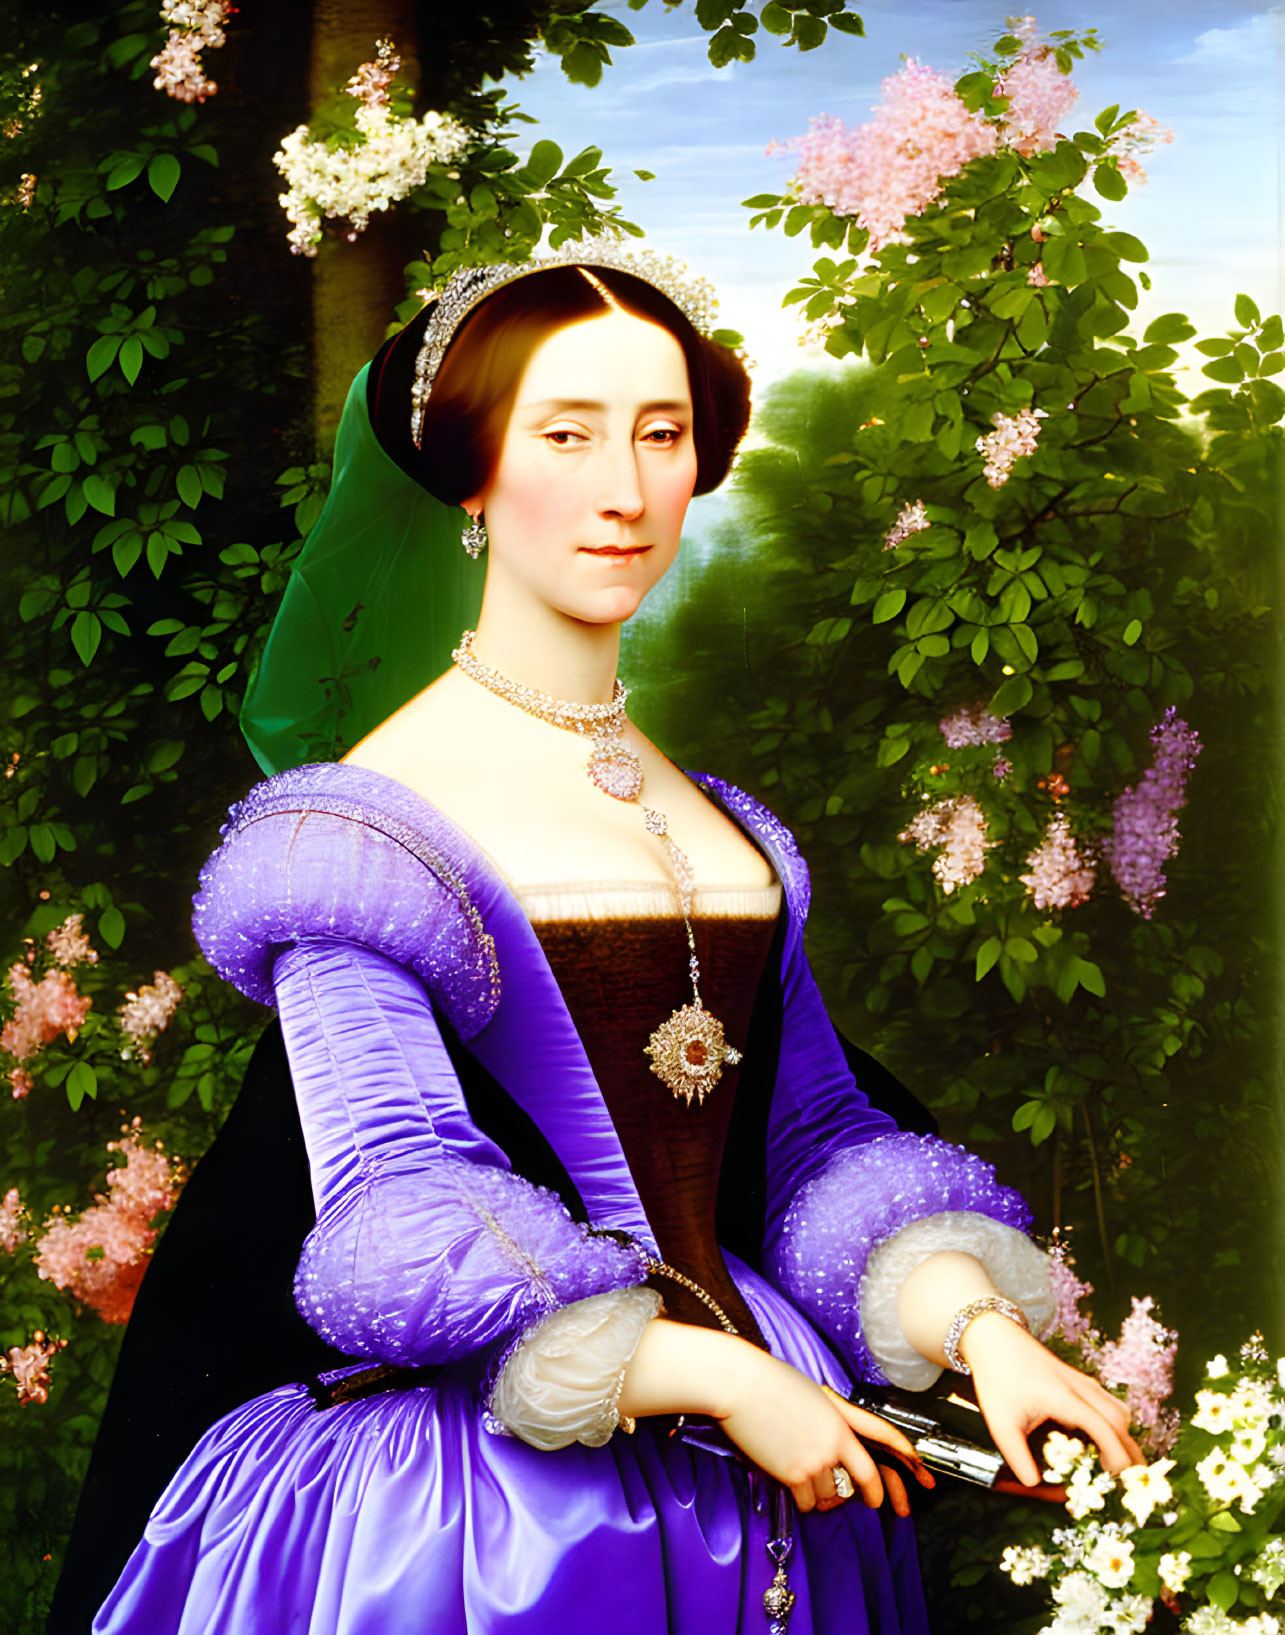 Portrait of Woman in Purple Gown with Headpiece and Jewelry